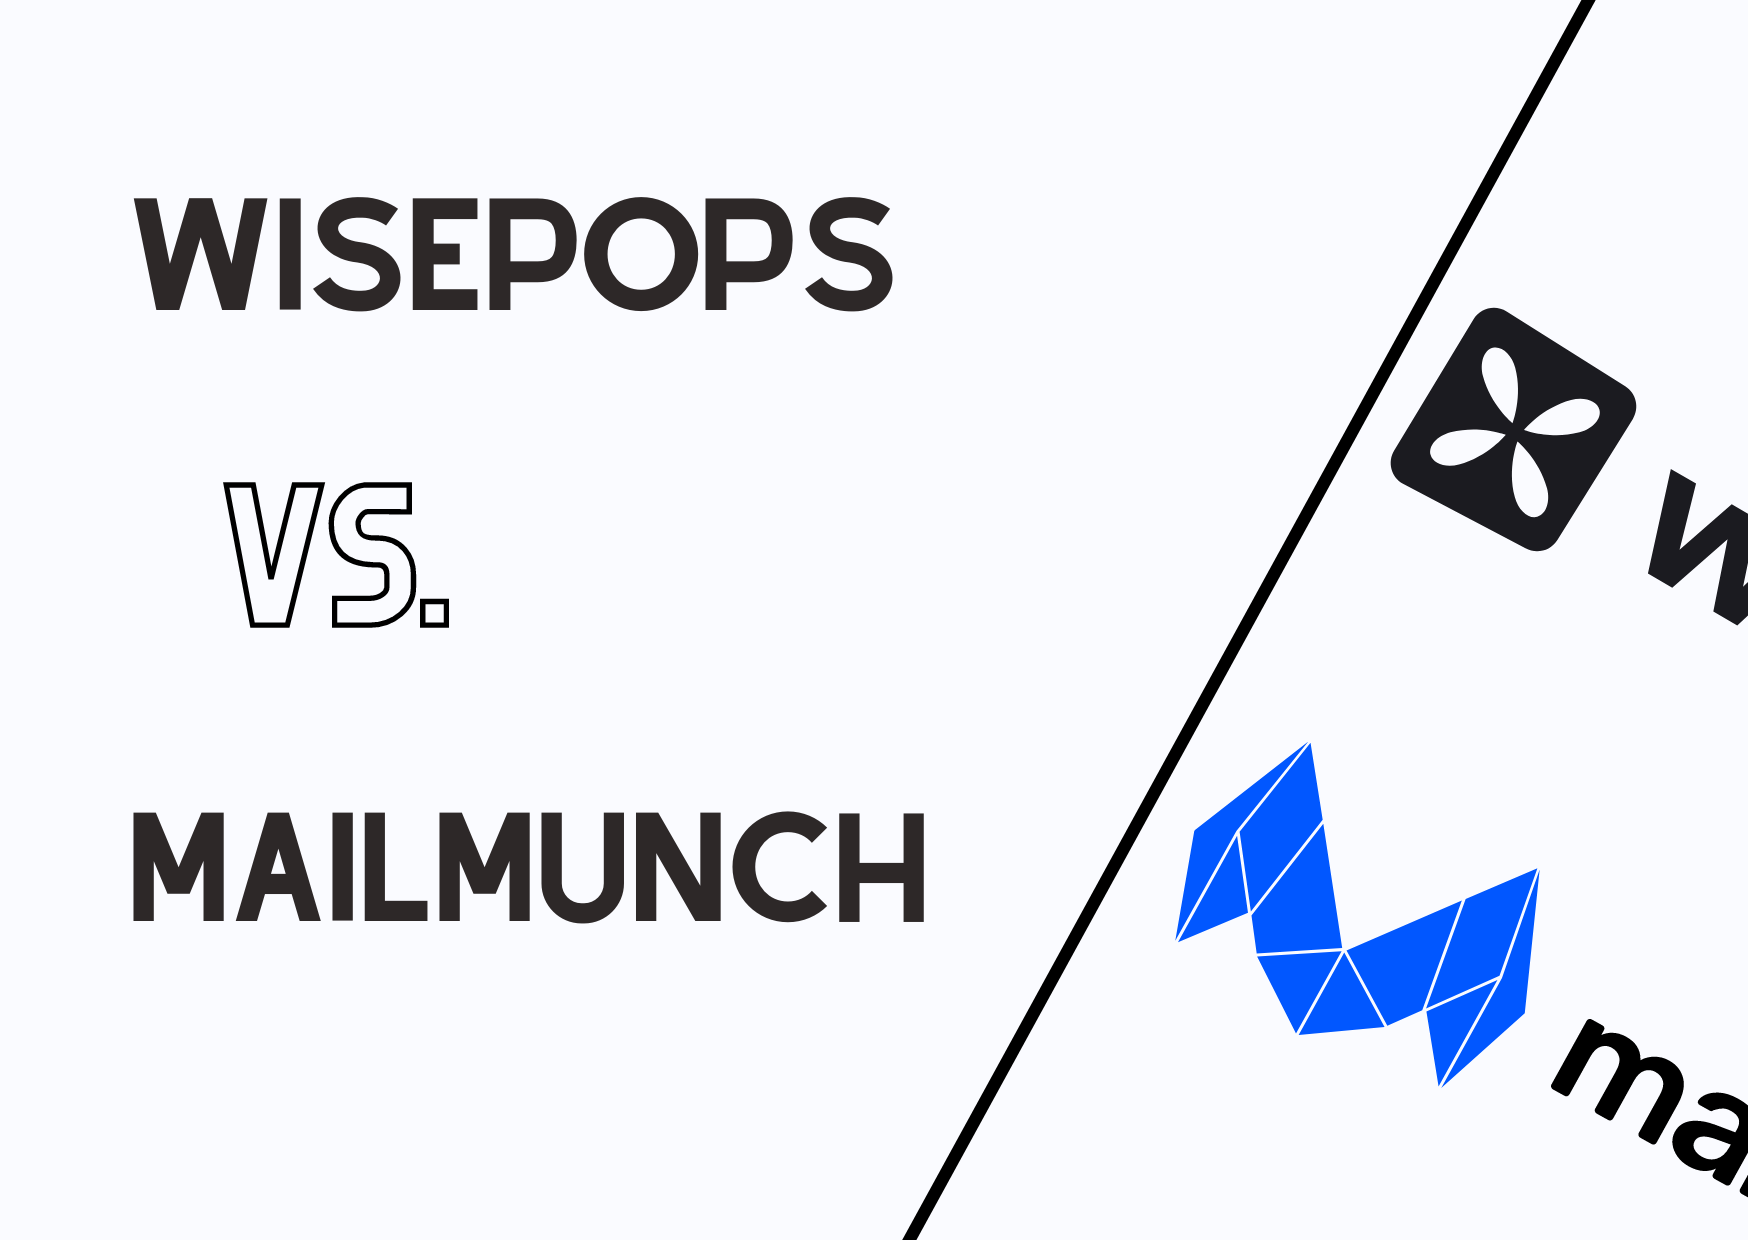 Wisepops vs Mailmunch with their names and logos